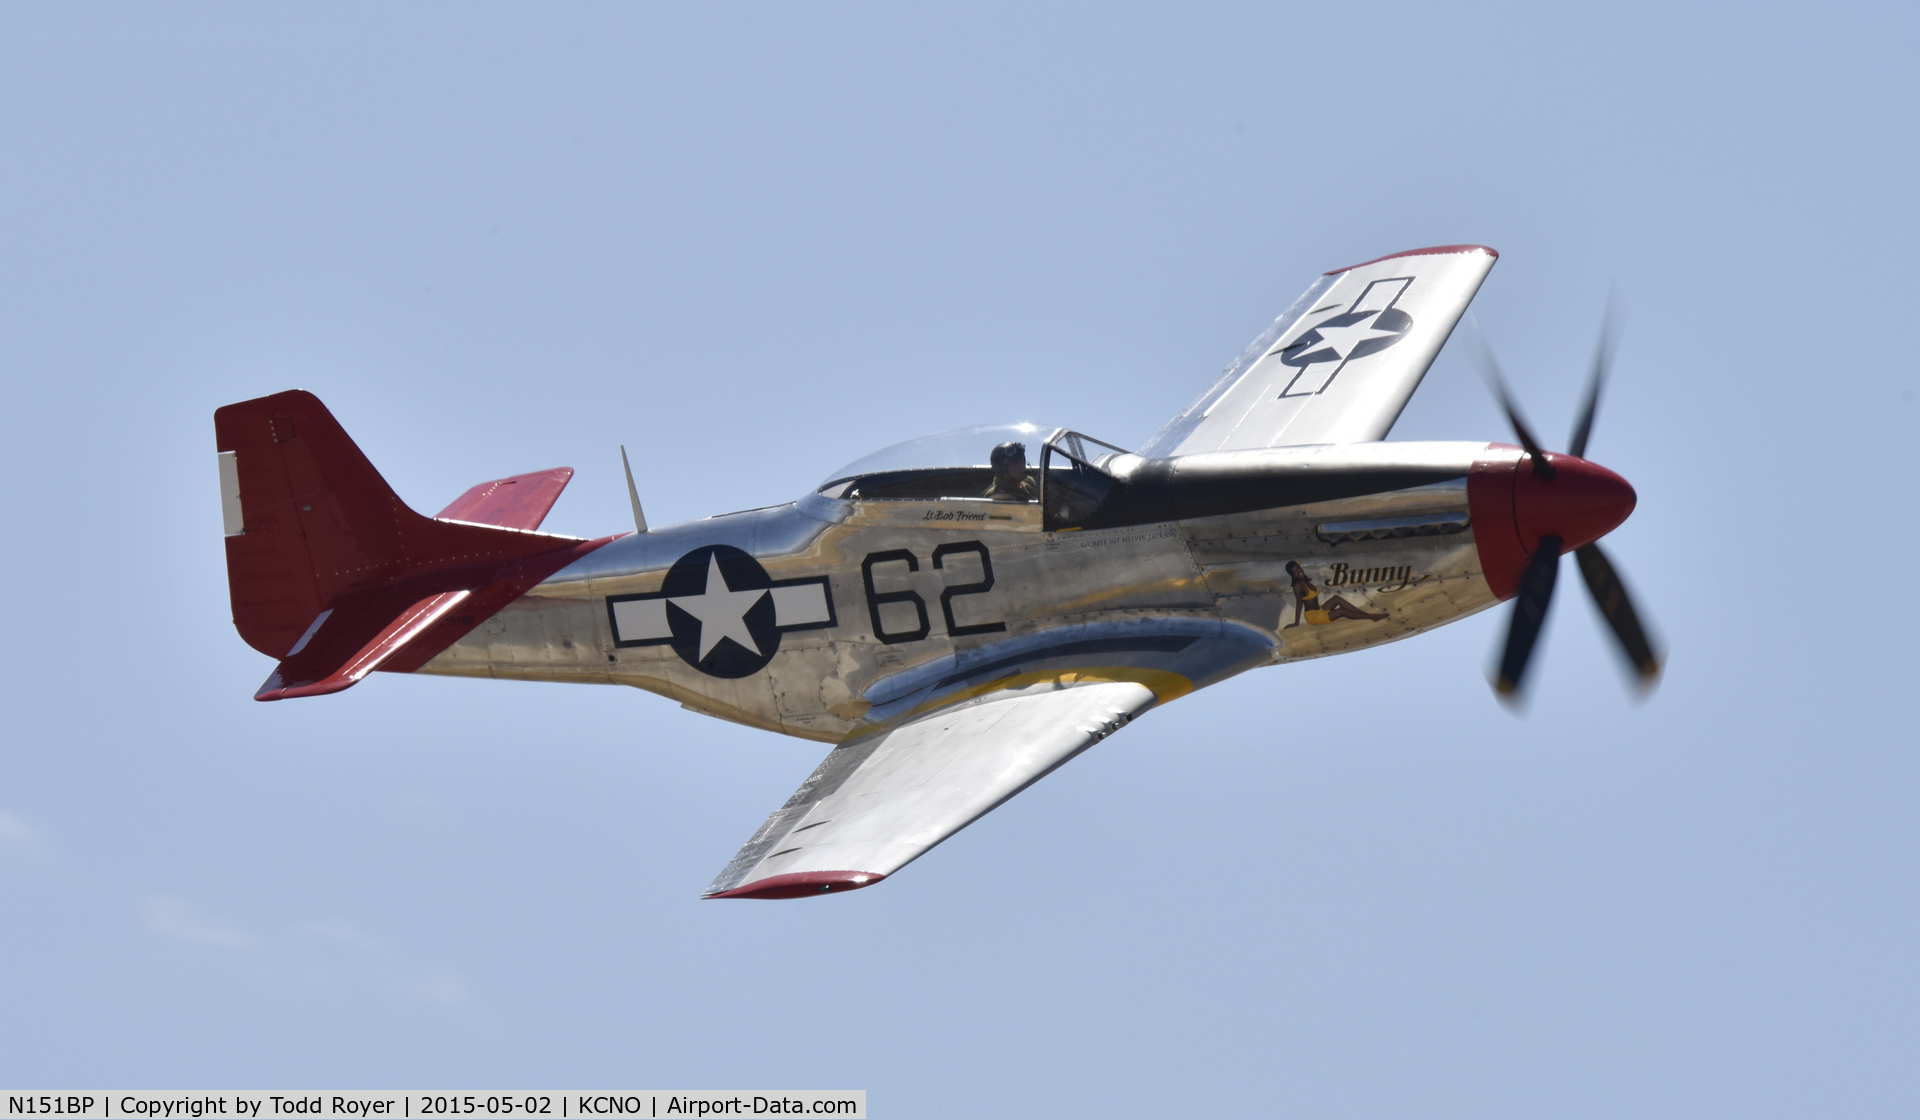 N151BP, 1944 North American P-51D Mustang C/N 122-41448, Flying at the Planes of Fame Airshow